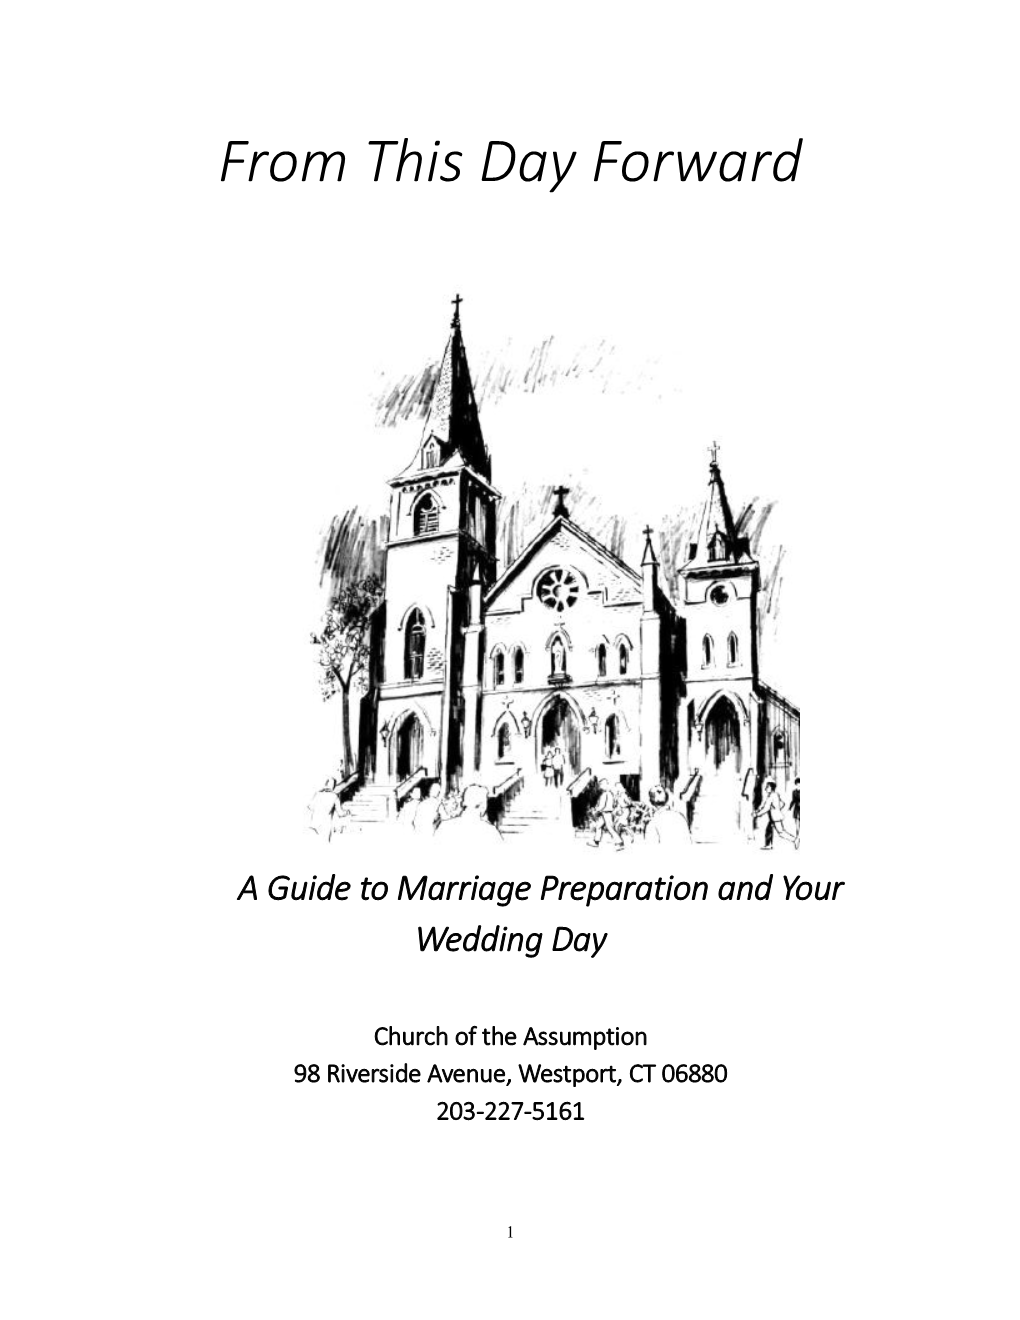 A Guide to Marriage Preparation and Your Wedding Day